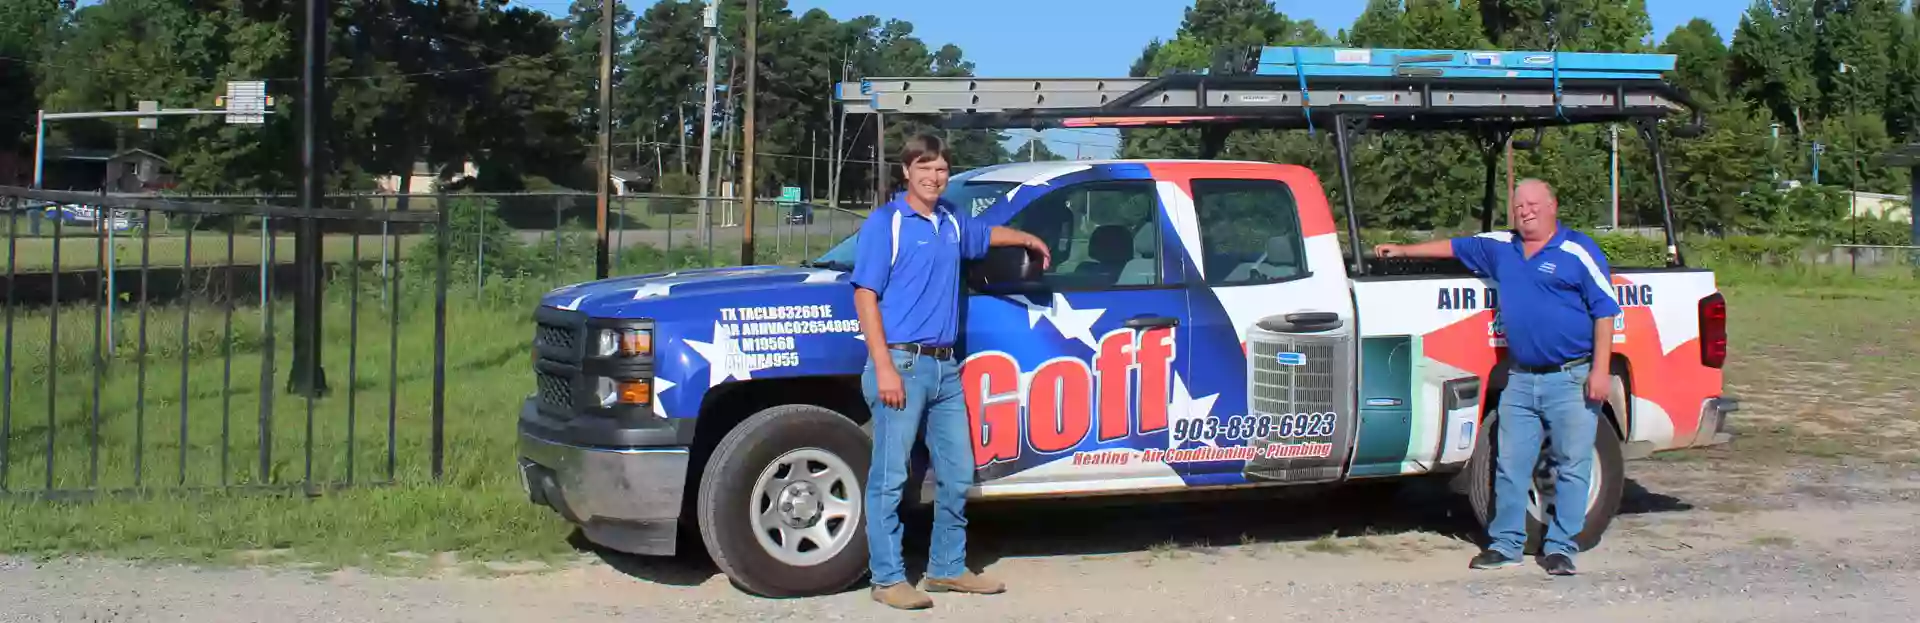 Goff Heating/Air Conditioning & Plumbing